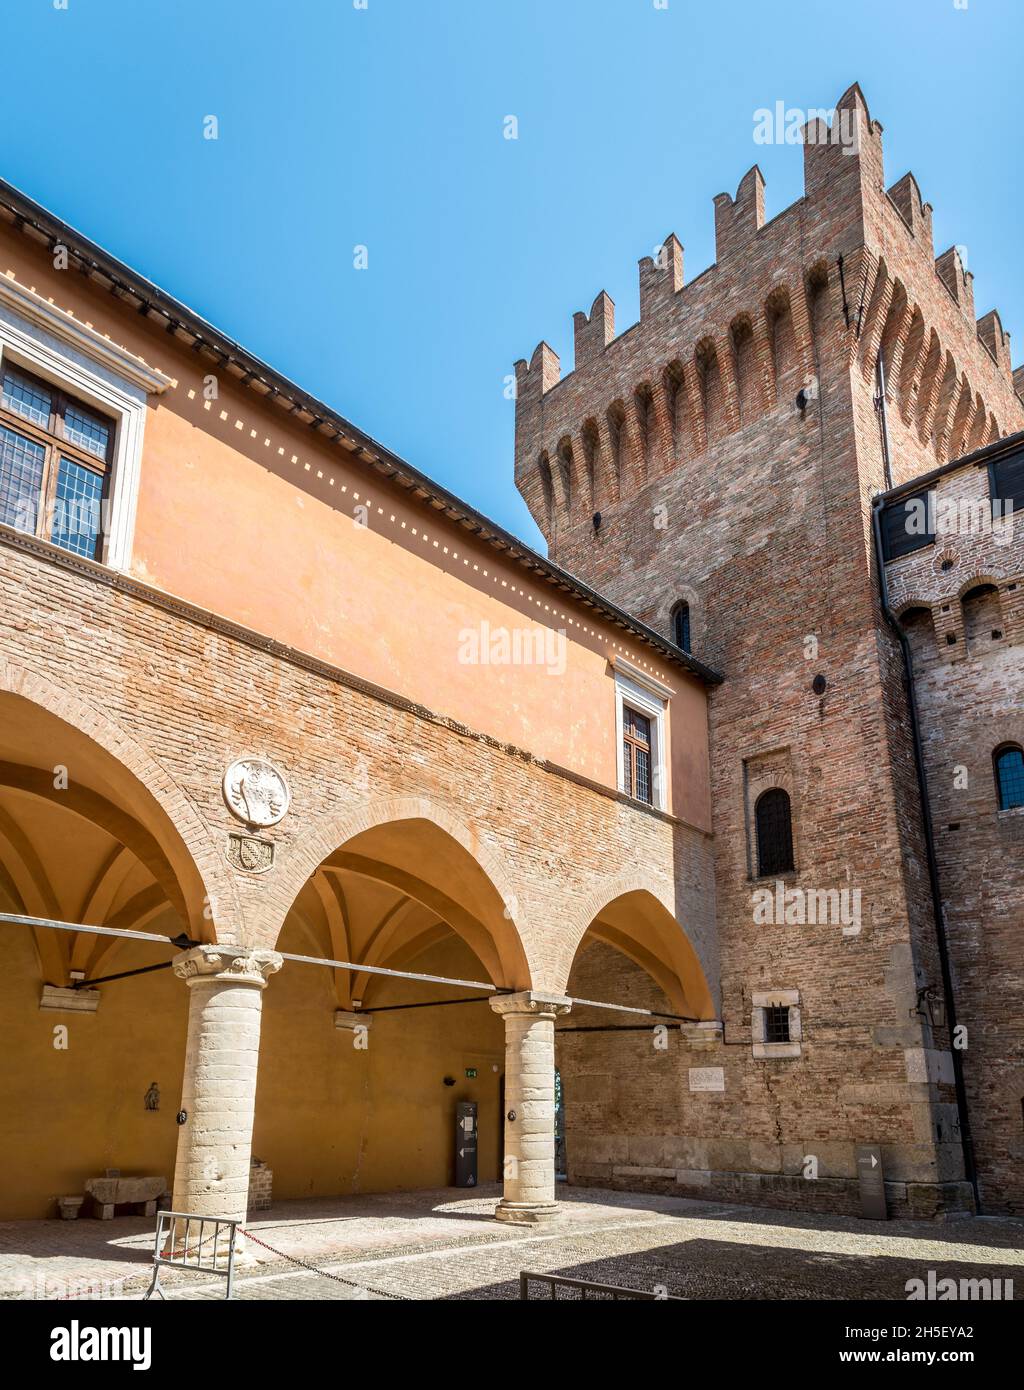 Medieval 'Rocca' or castle of the little town of Gradara in the region of Marche, Italy, Europe Stock Photo